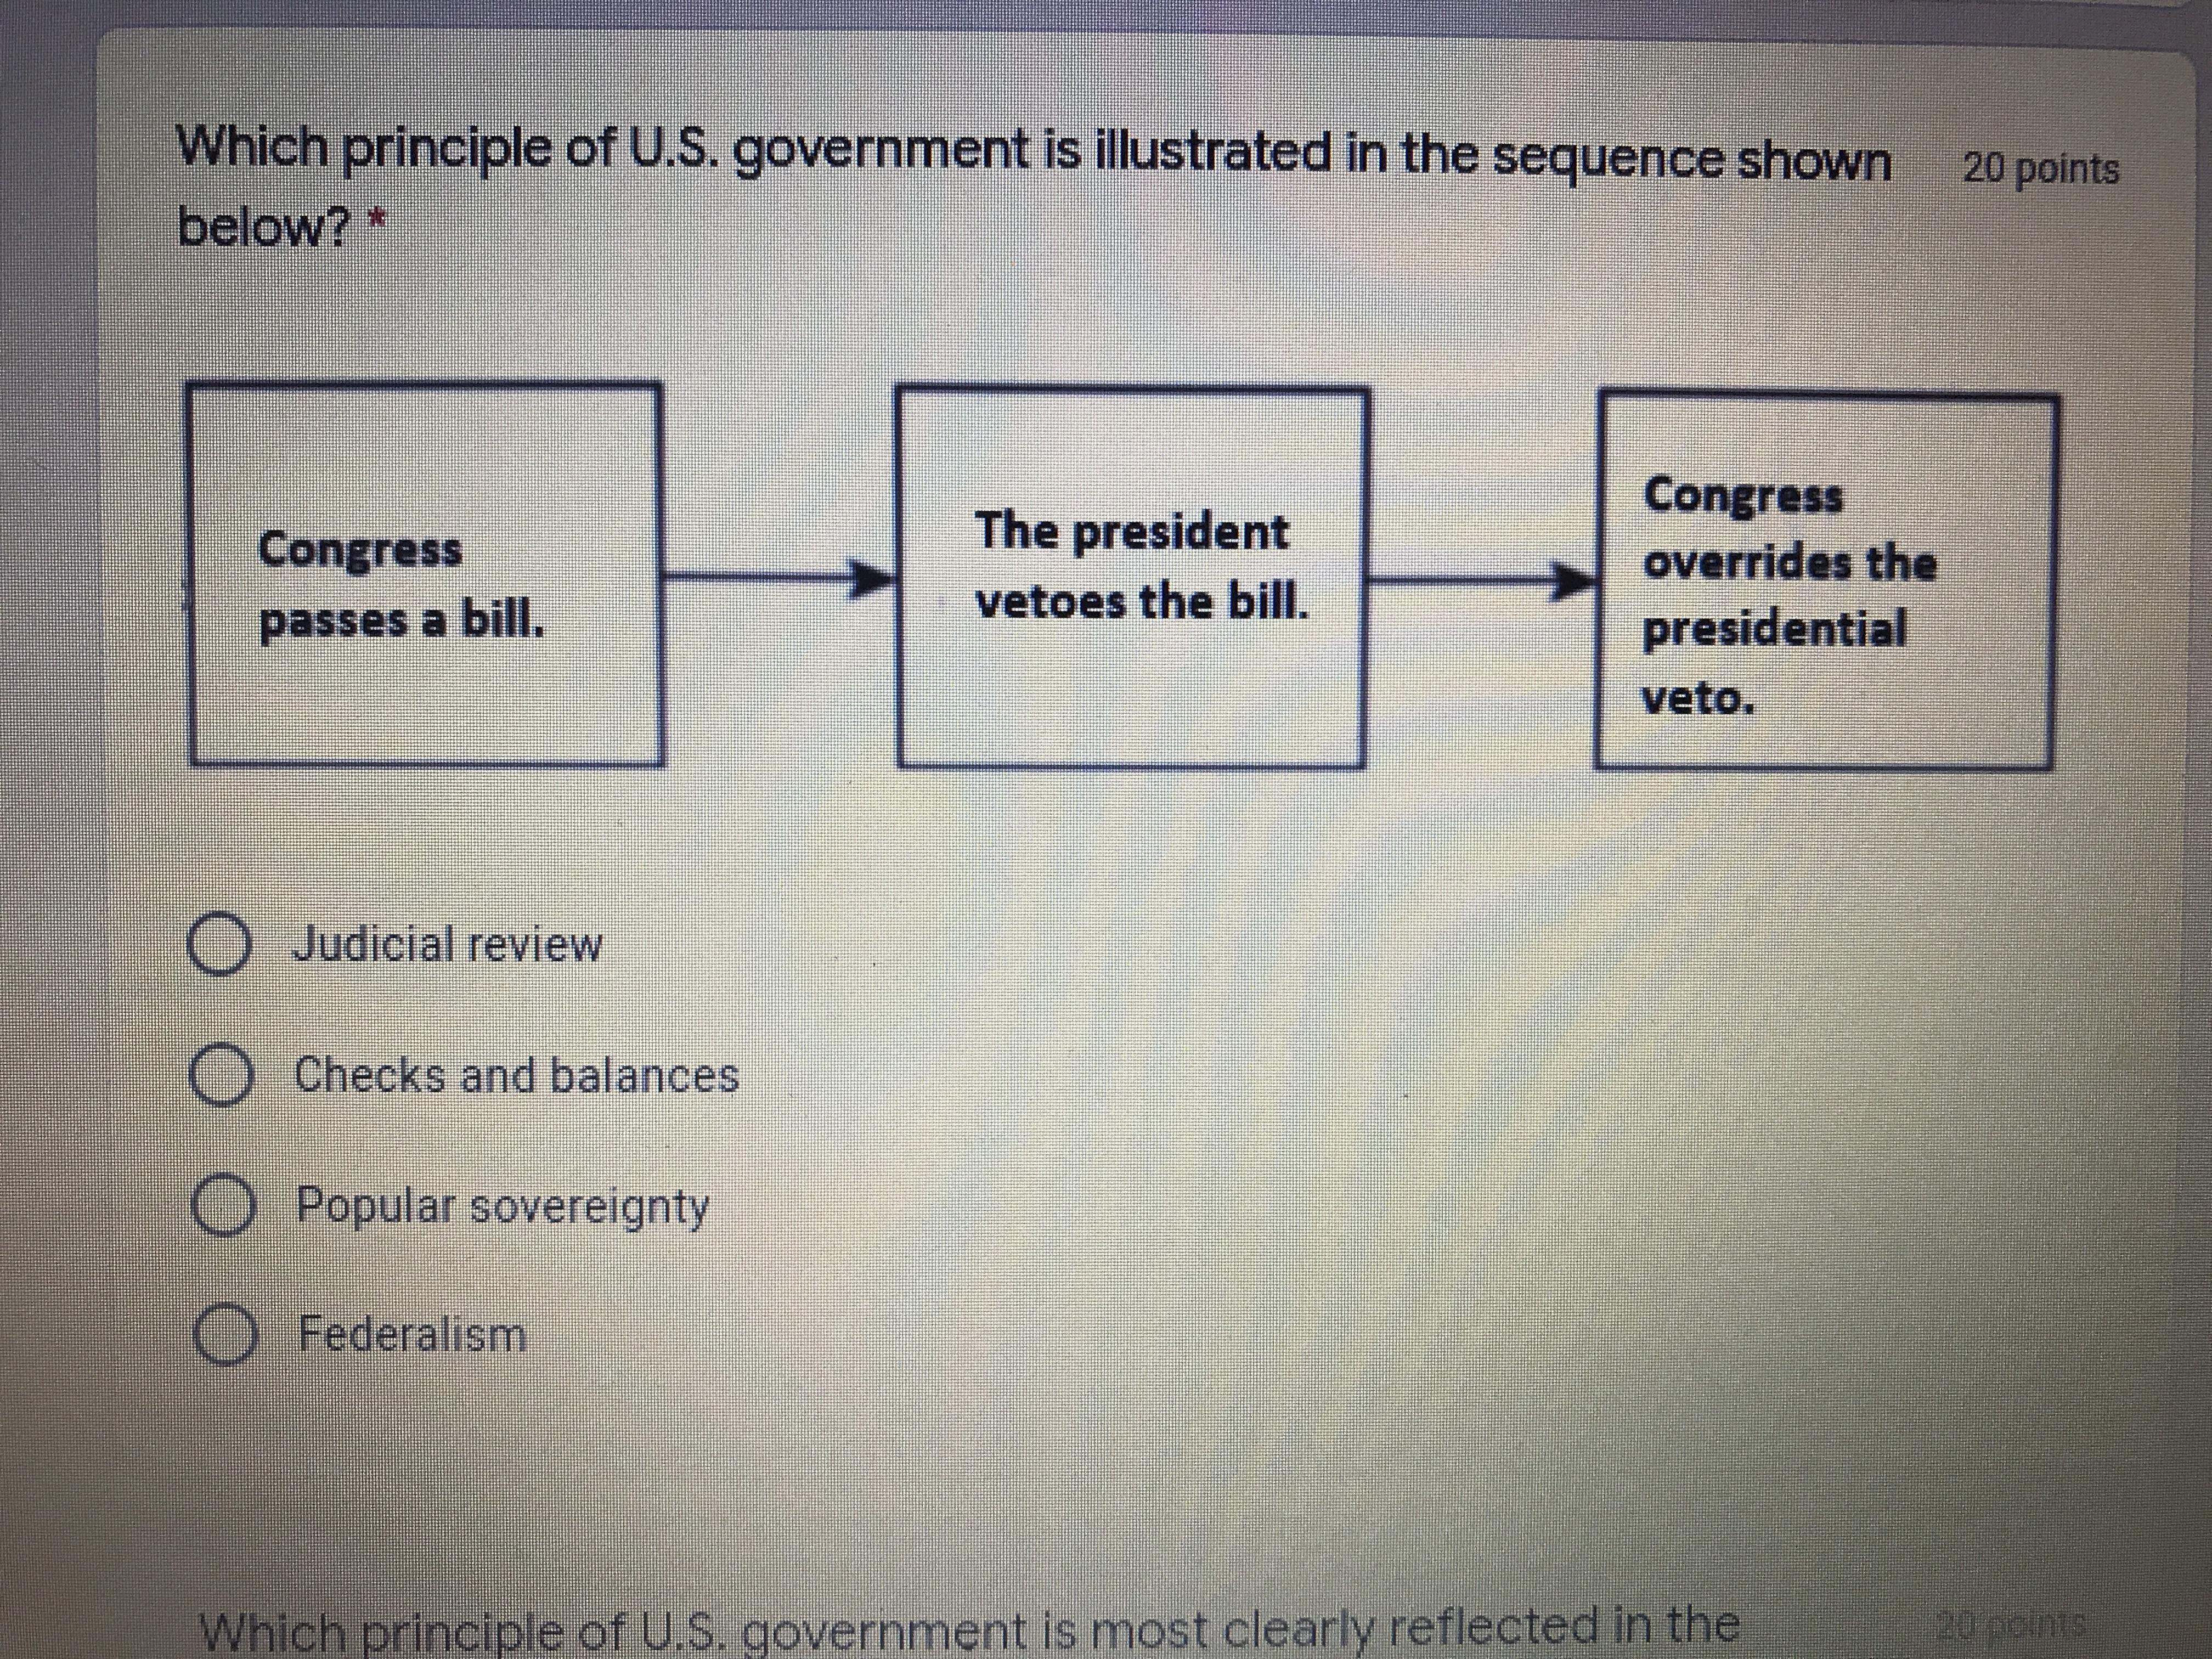 Which Principle Of U.s Government Is Illustrated In The Sequence Shown Below?